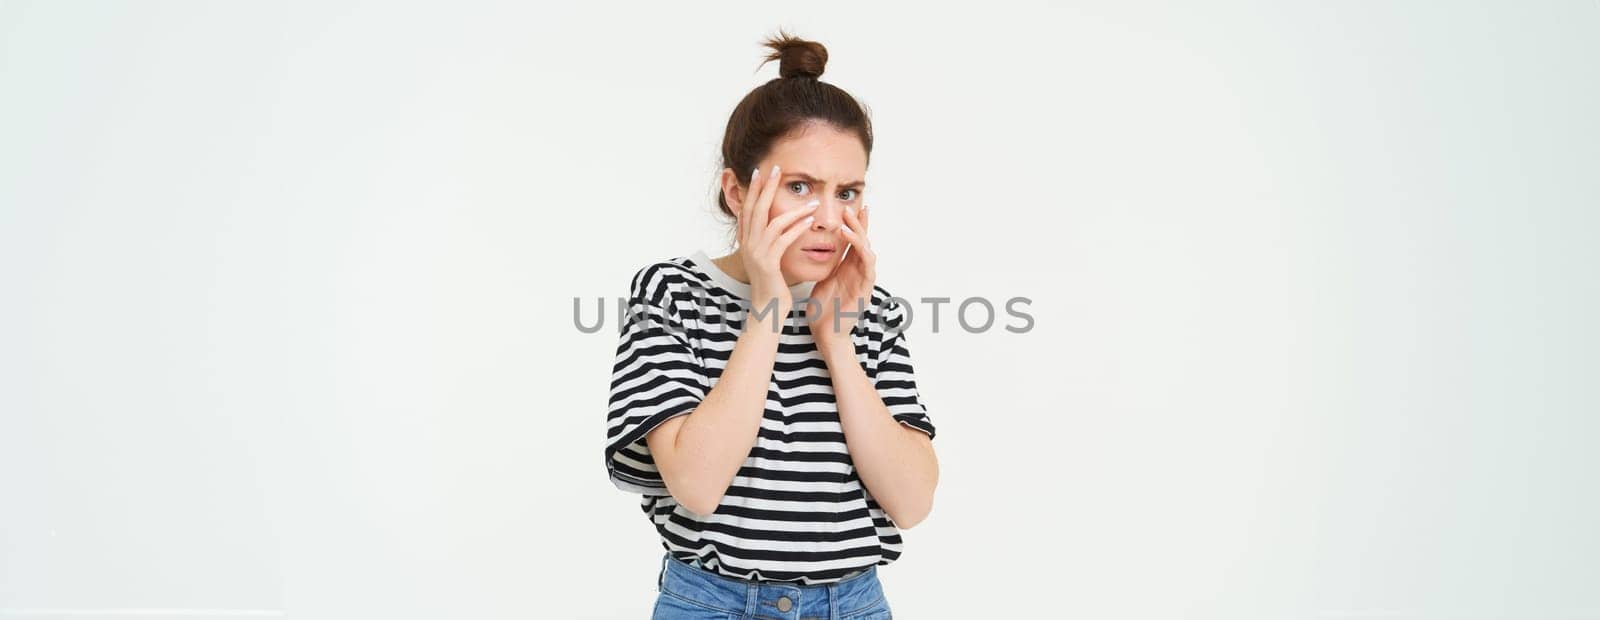 Image of woman looking scared, apalled by something shocking, standing over white background.